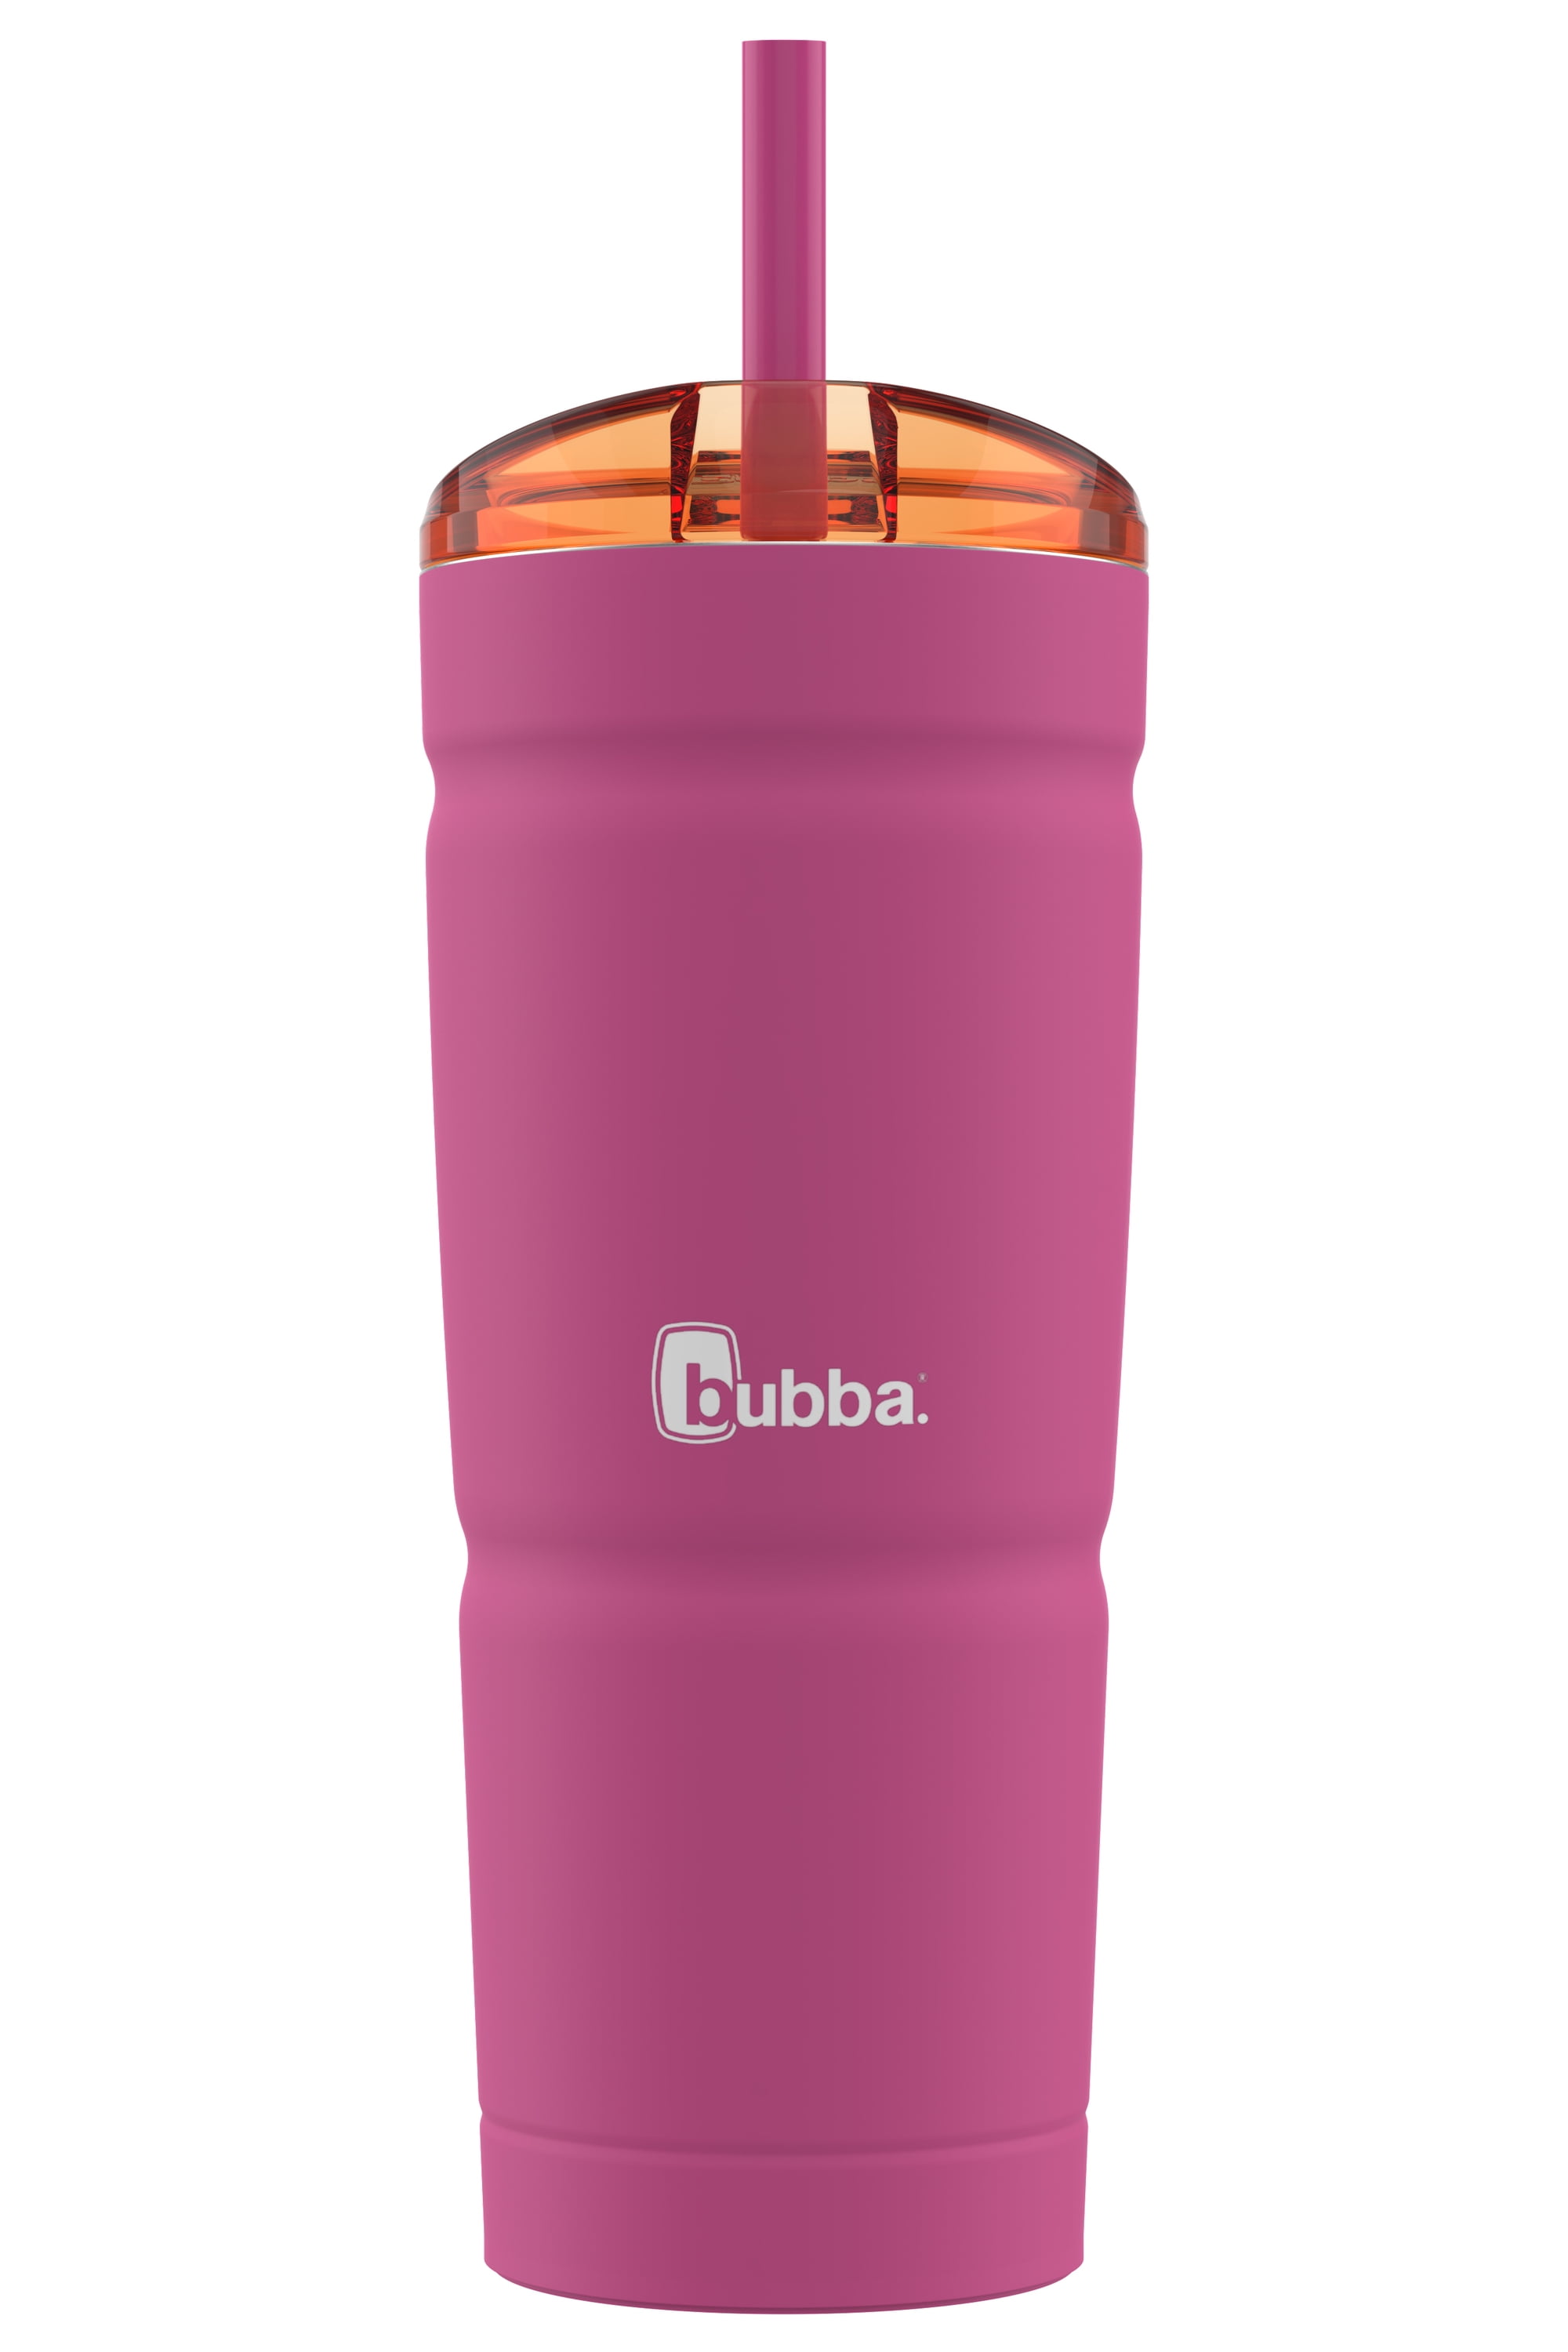 Bubba 24 oz. Pink Sorbet and Licorice Stainless Steel Tumbler (Set of 2)  2149490 - The Home Depot